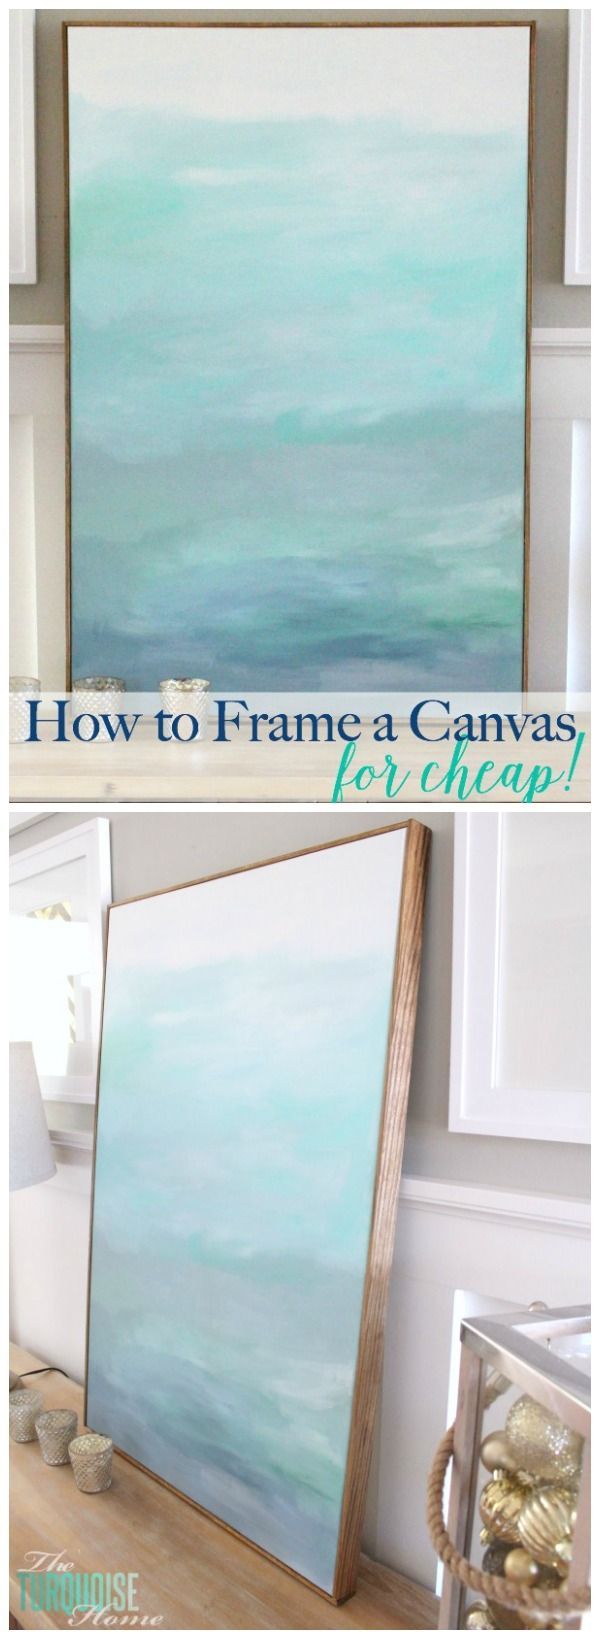 No WAY! This is such an easy (and cheap!) way frame a canvas. It makes a $22 DIY art piece look like it’s worth much more!!